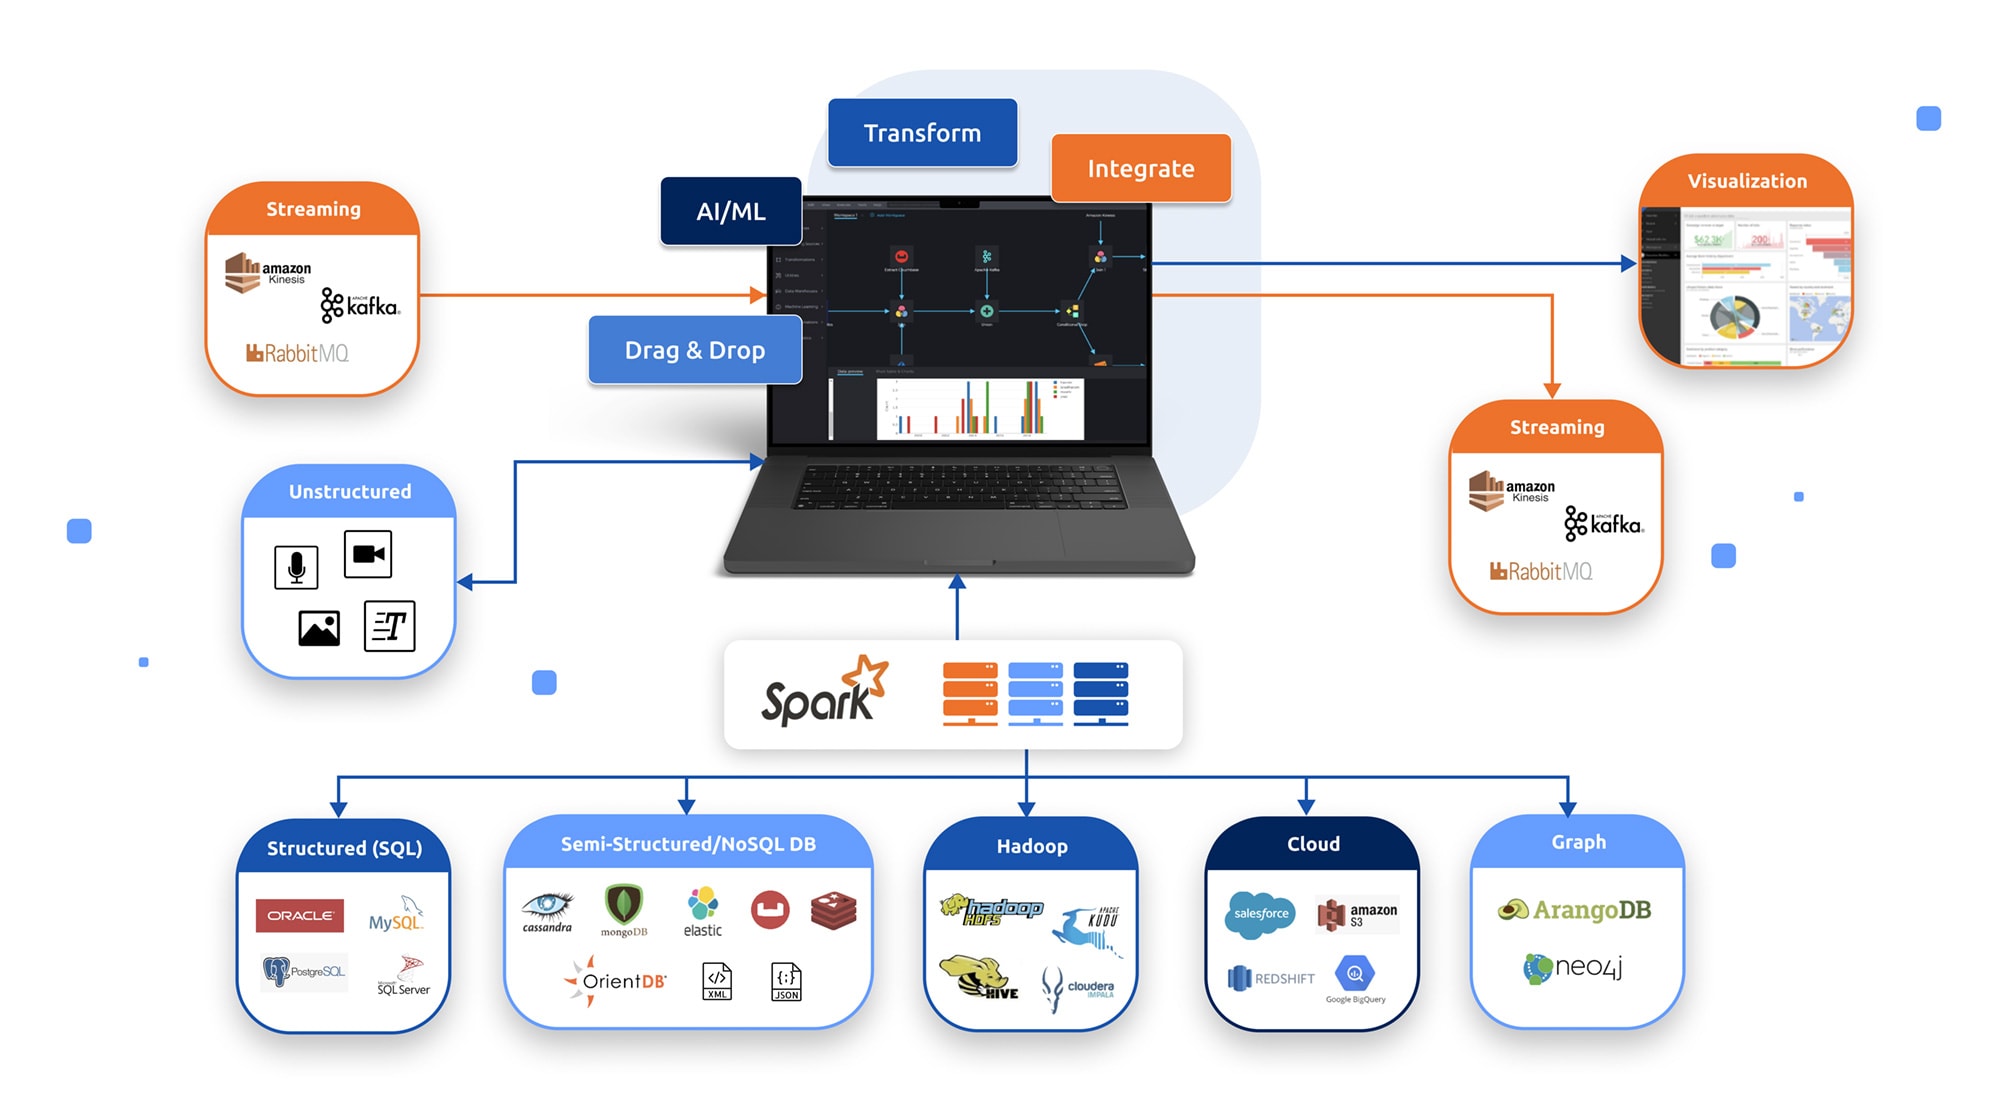 The diagram contains a sample of the available data sources /destinations. The entire set of Spark data sources and destinations available. *Logos are representations of integration options